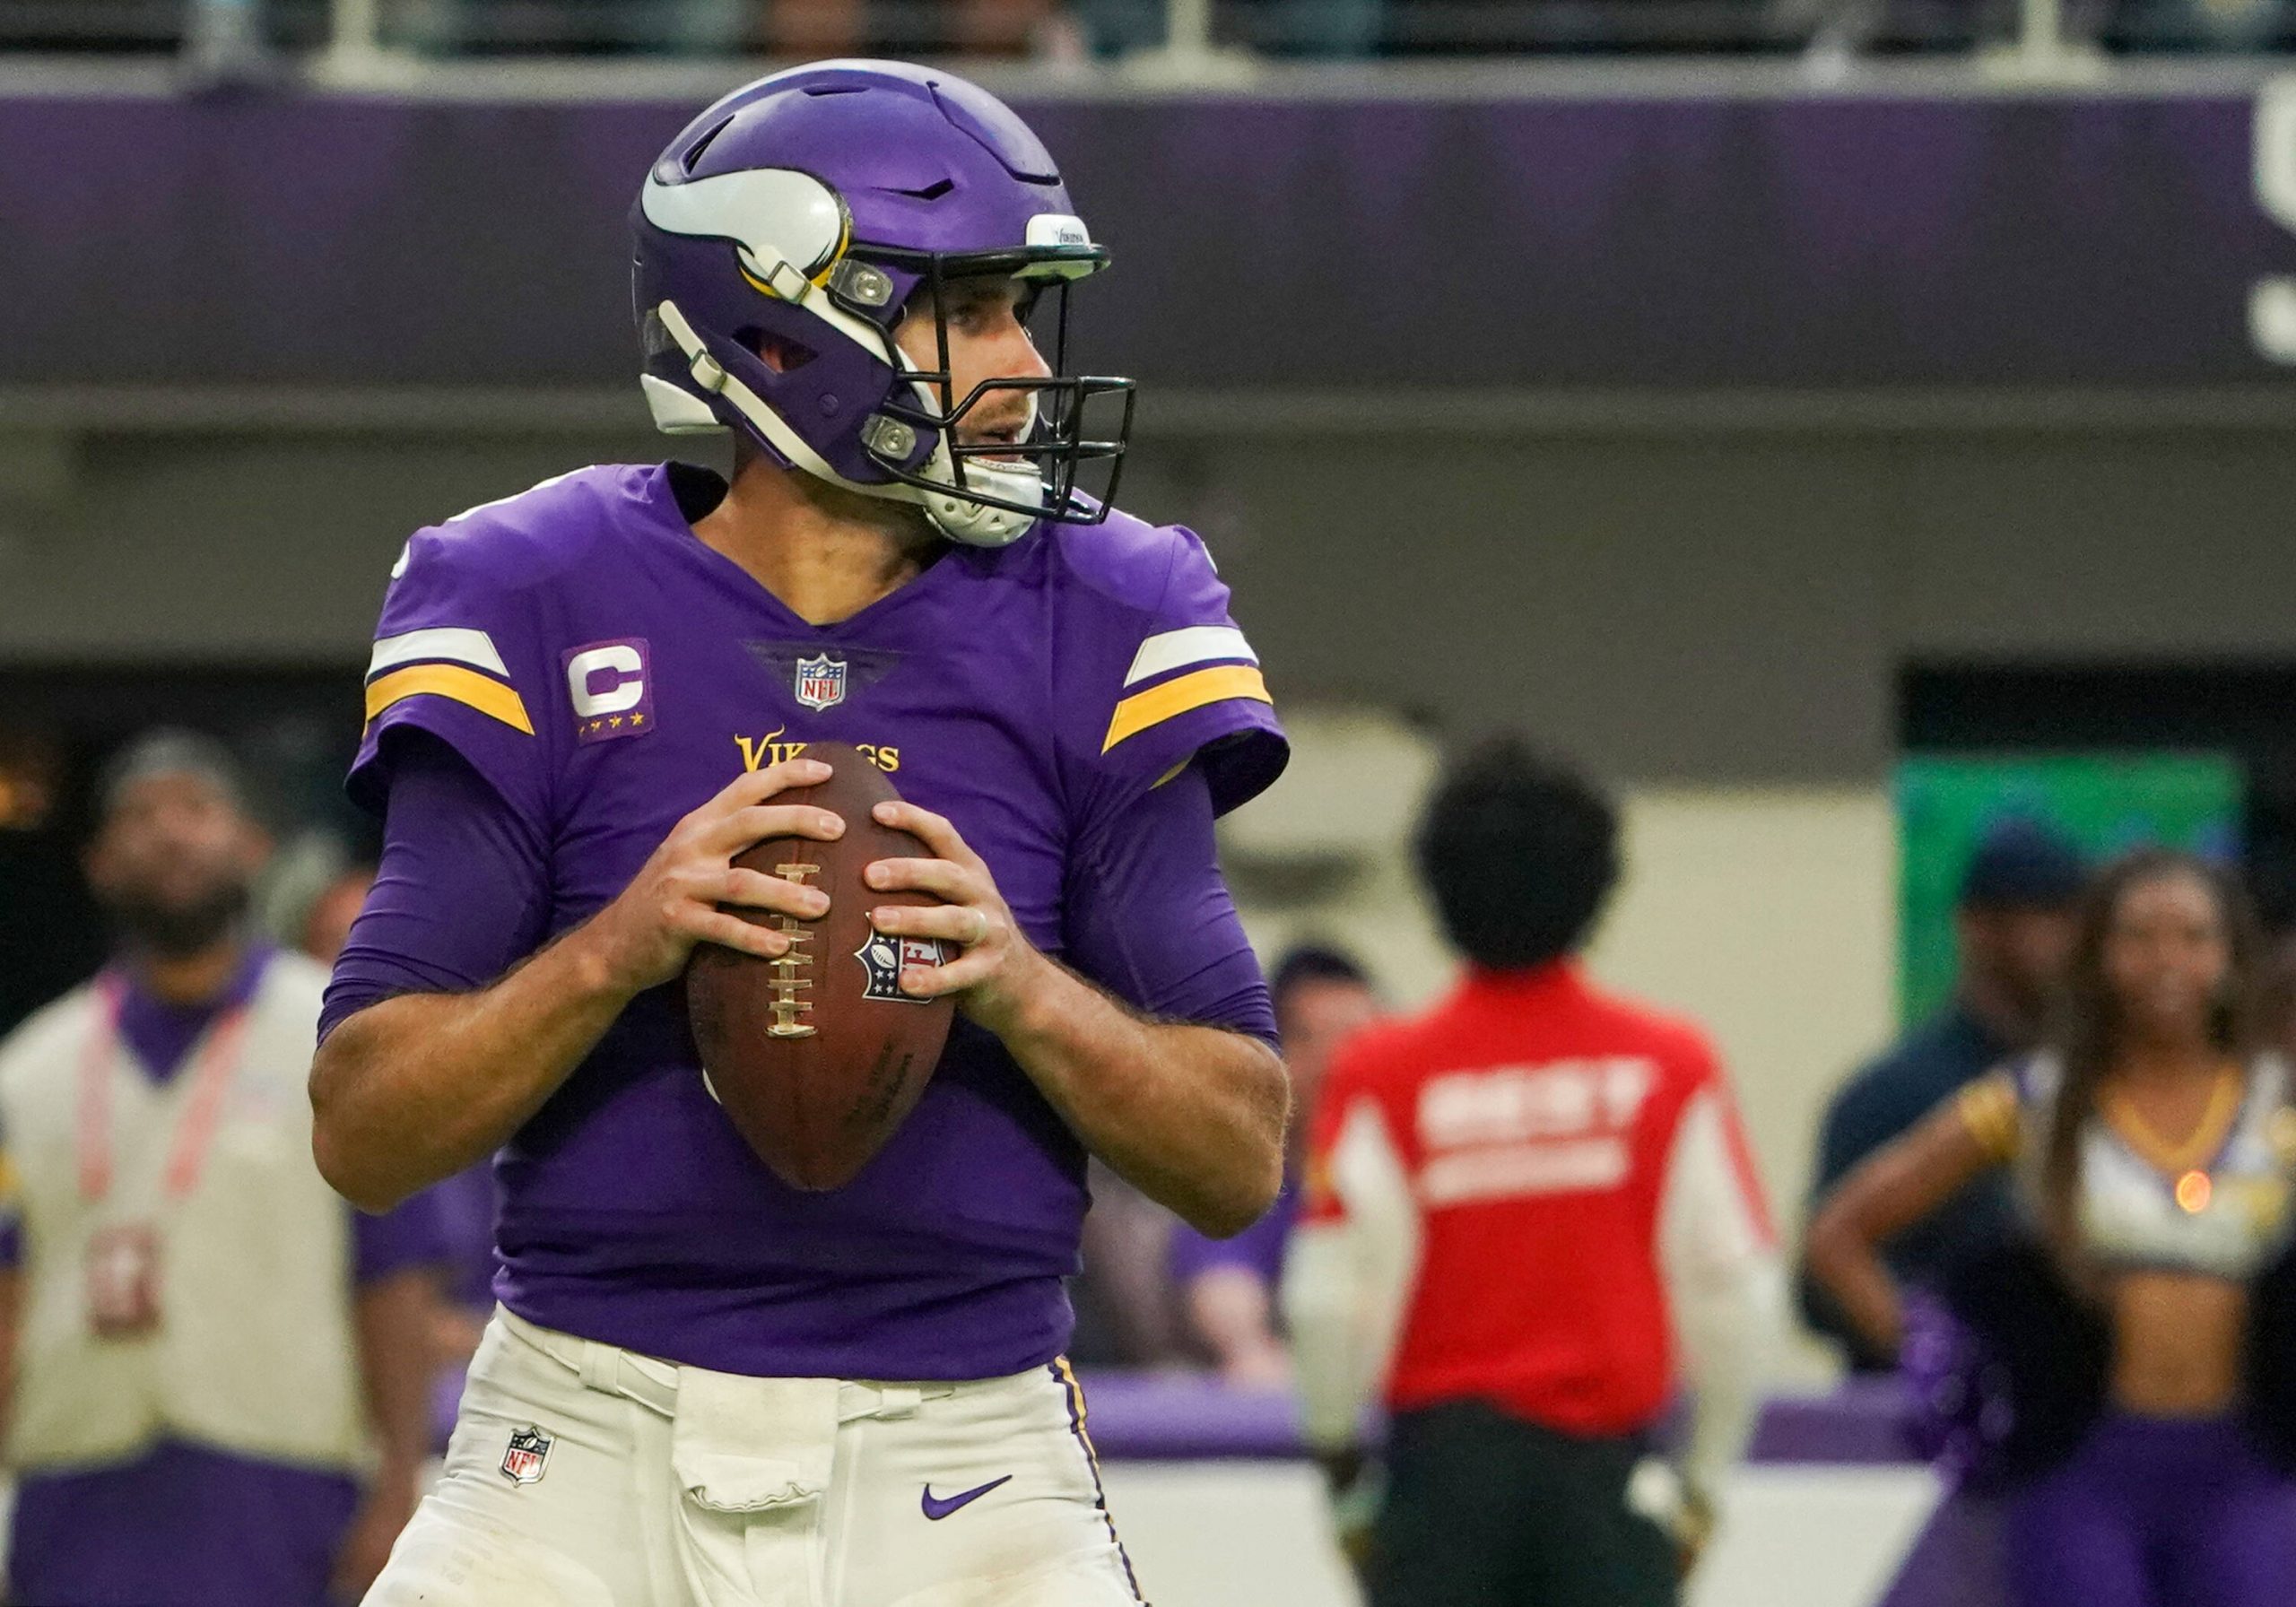 MINNEAPOLIS, MN - SEPTEMBER 26: Minnesota Vikings Quarterback Kirk Cousins 8 looks to throw during the third quarter of a game between the Minnesota Vikings and Seattle Seahawks on on September 26, 2021, at U.S. Bank Stadium in Minneapolis, MN.Photo by Nick Wosika/Icon Sportswire NFL, American Football Herren, USA SEP 26 Seahawks at Vikings Icon2021092612